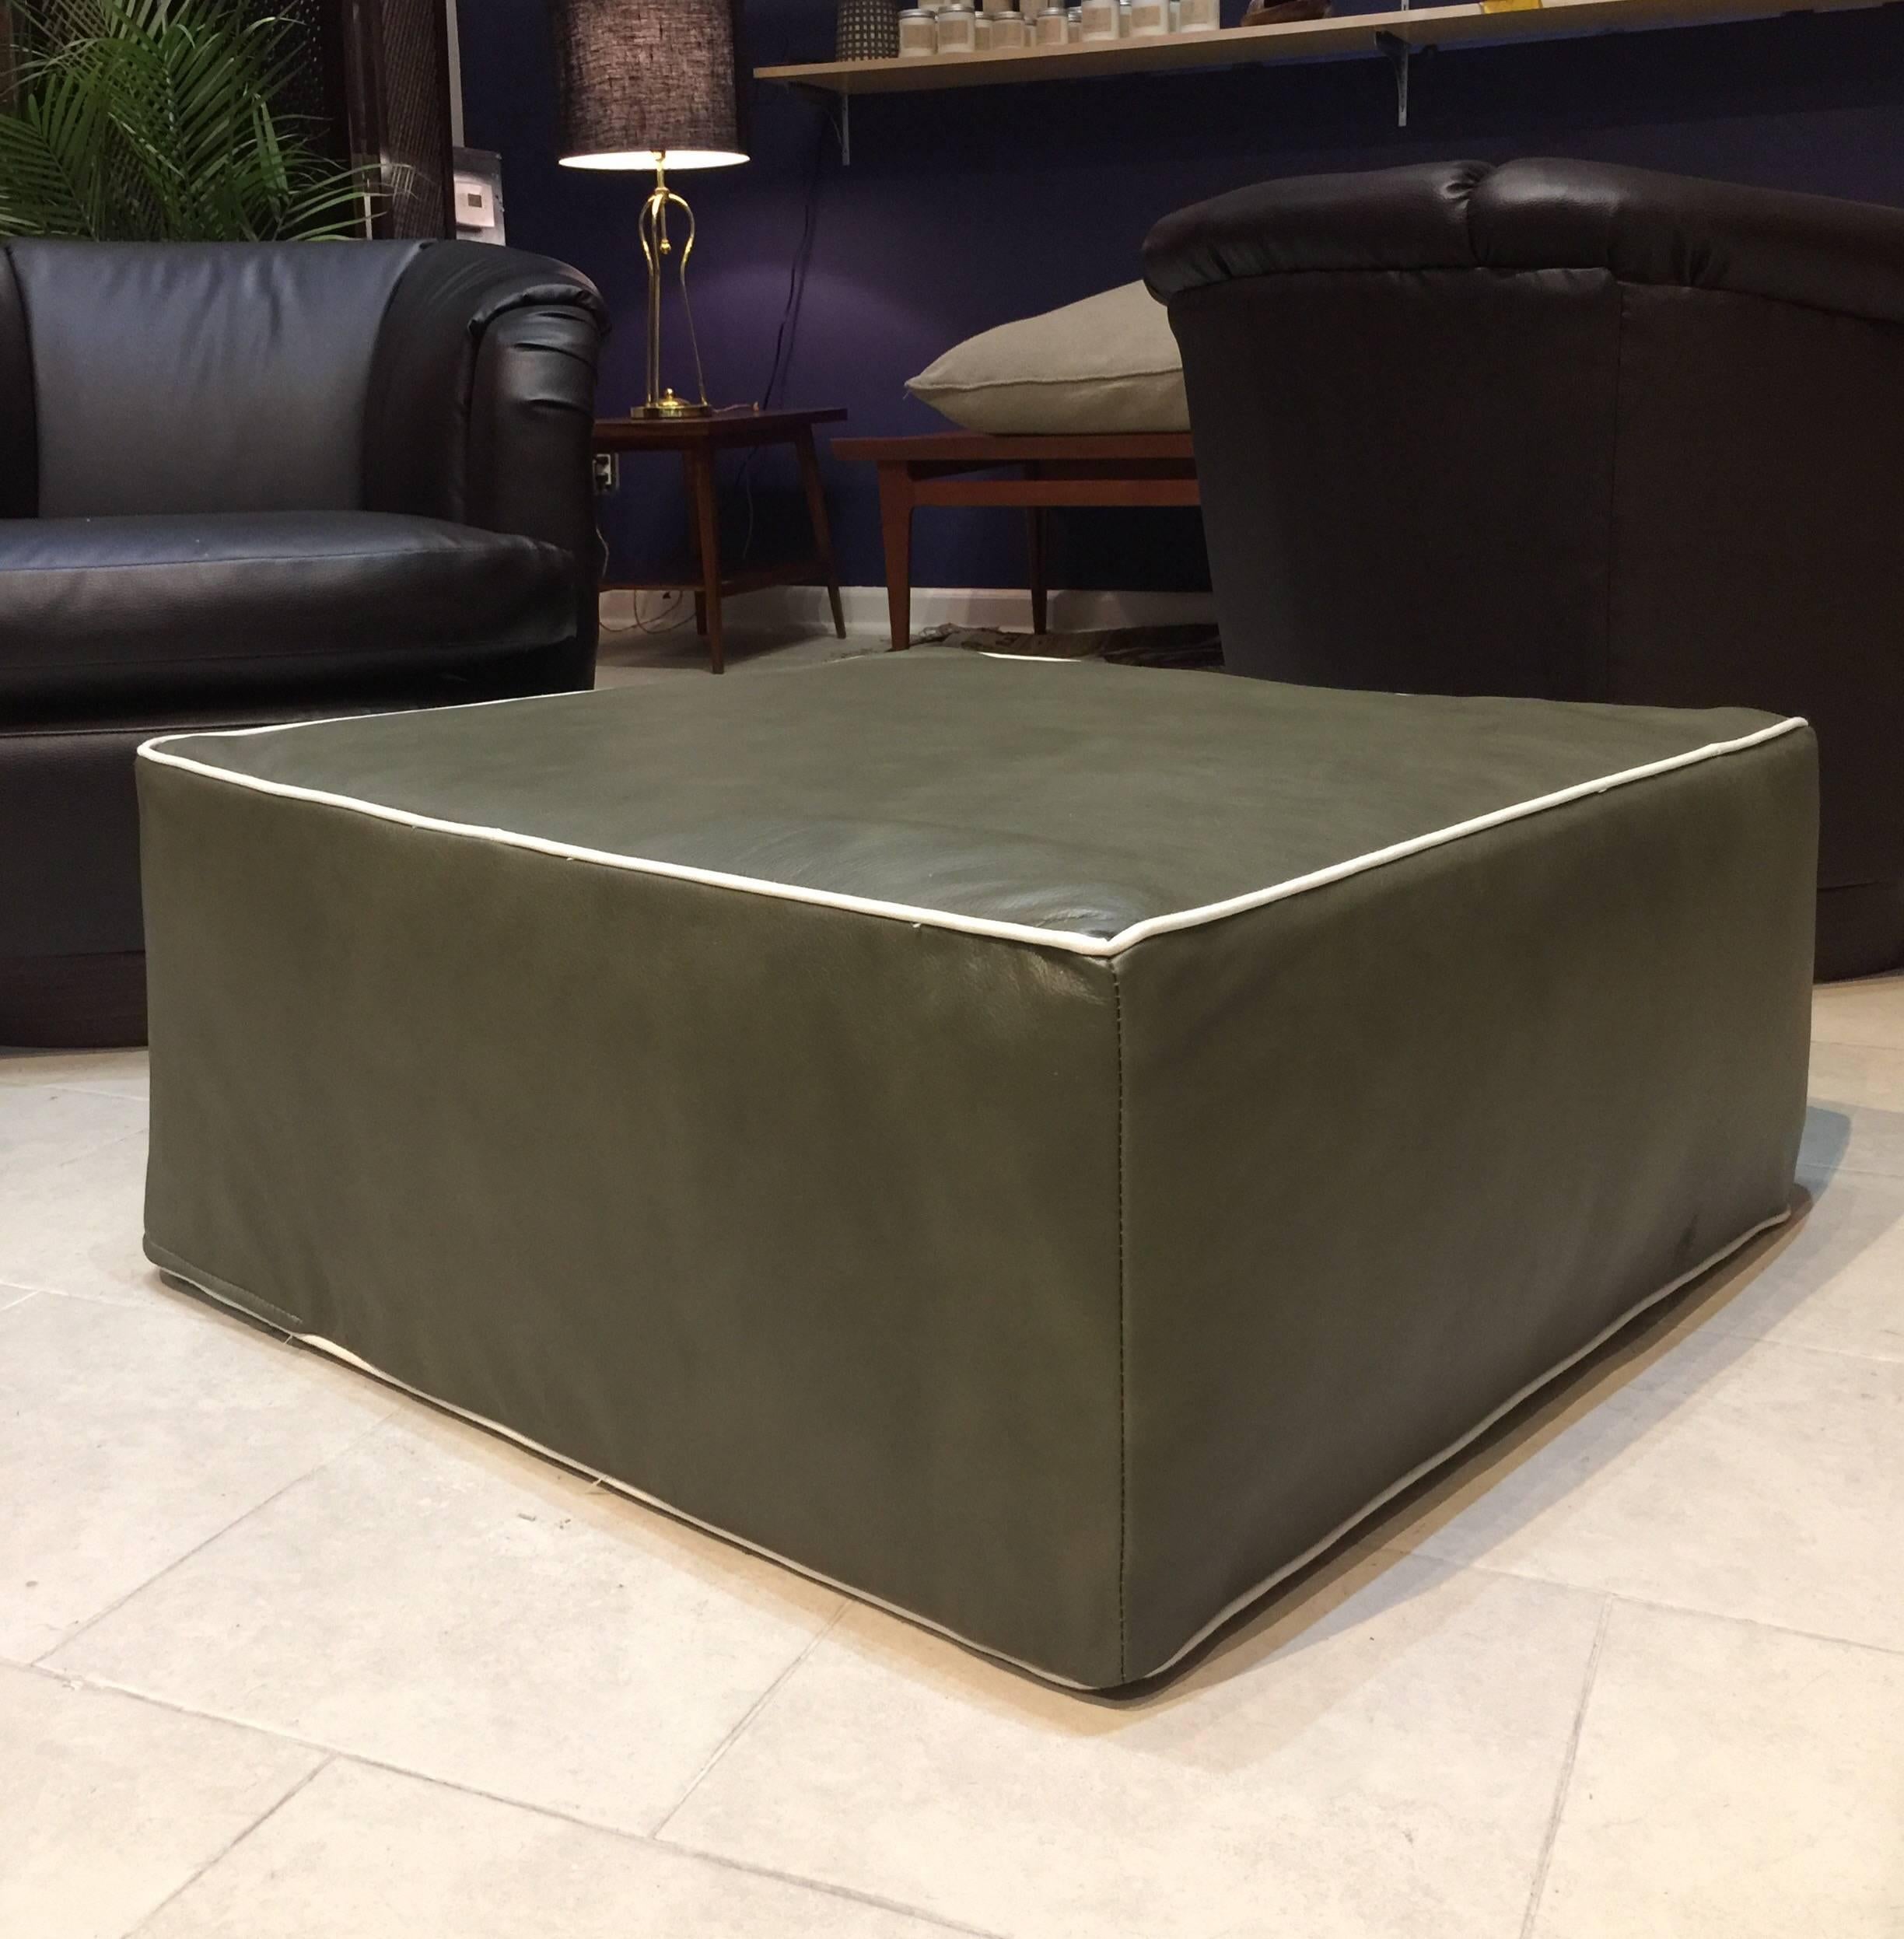 Regal Olive Green Leather and canvas oversized ottoman, custom design by Matter & Bone. Made to order.

Measures: W: 28